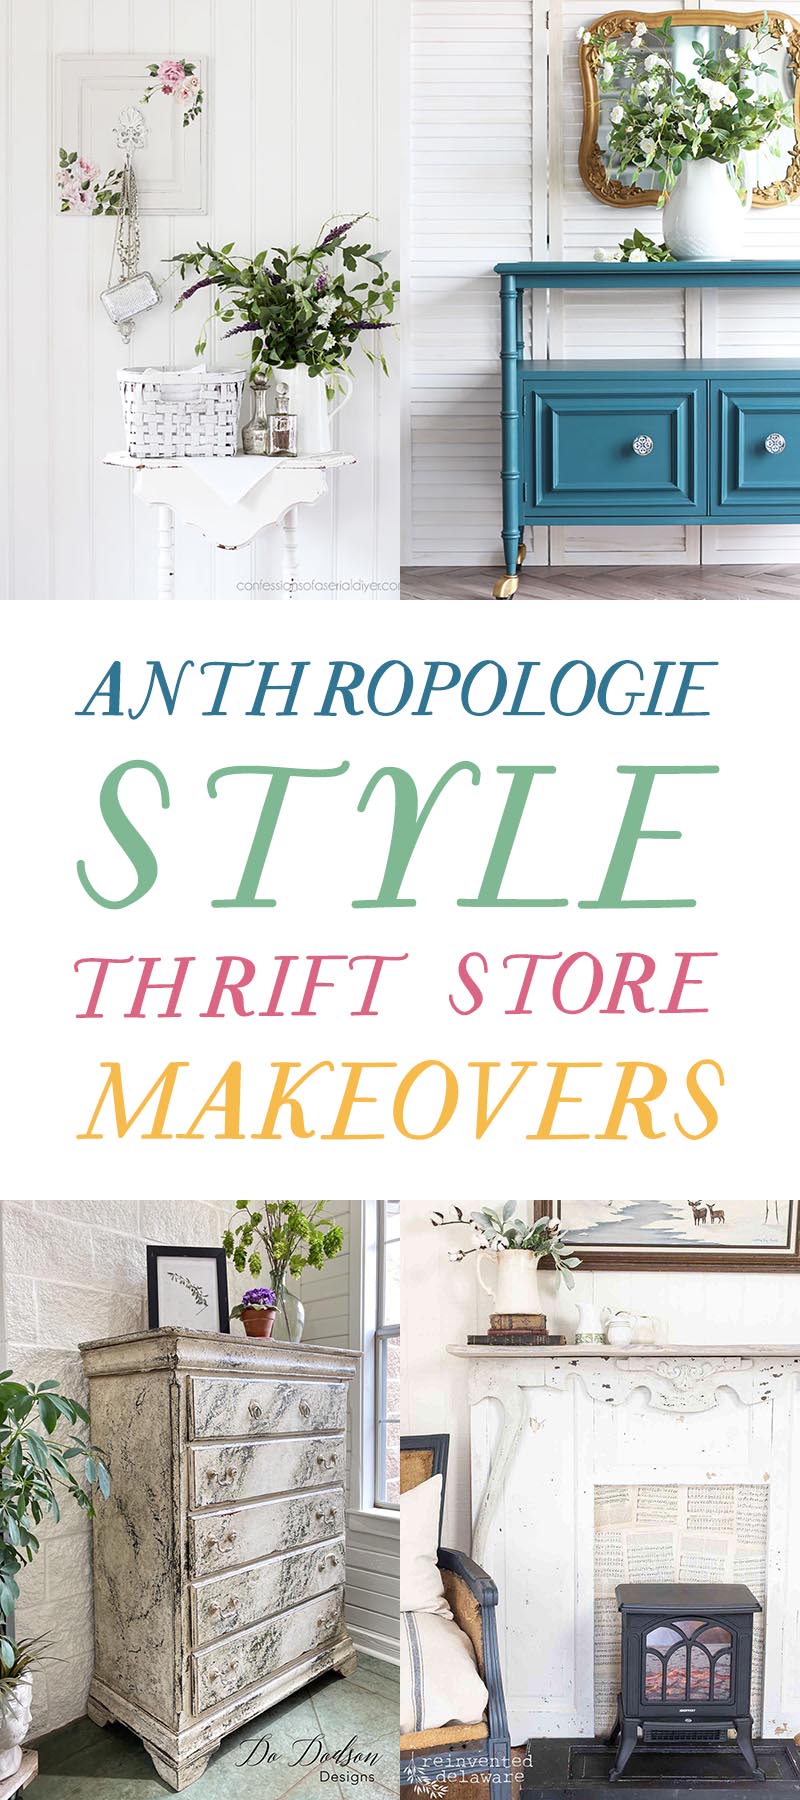 Anthropologie Style Thrift Store Makeovers are going to Inspire you to create your own original diy project that will be amazing!